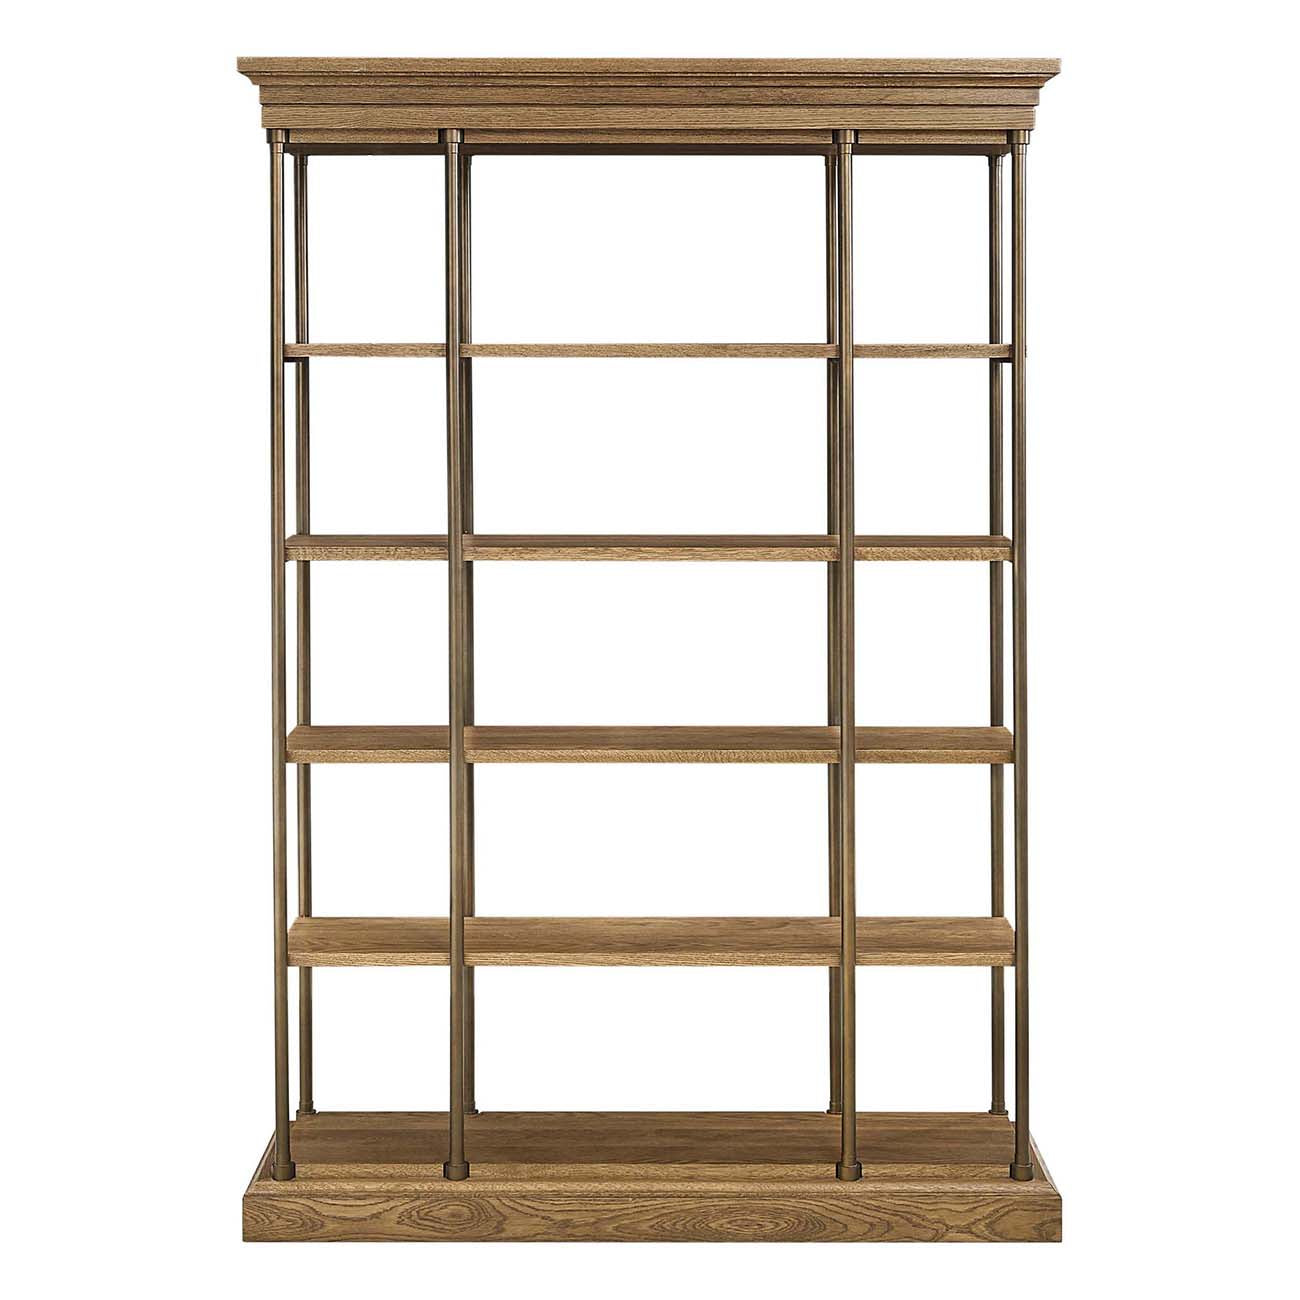 St. Lawrence Metal Bookcase - Stickley Brand